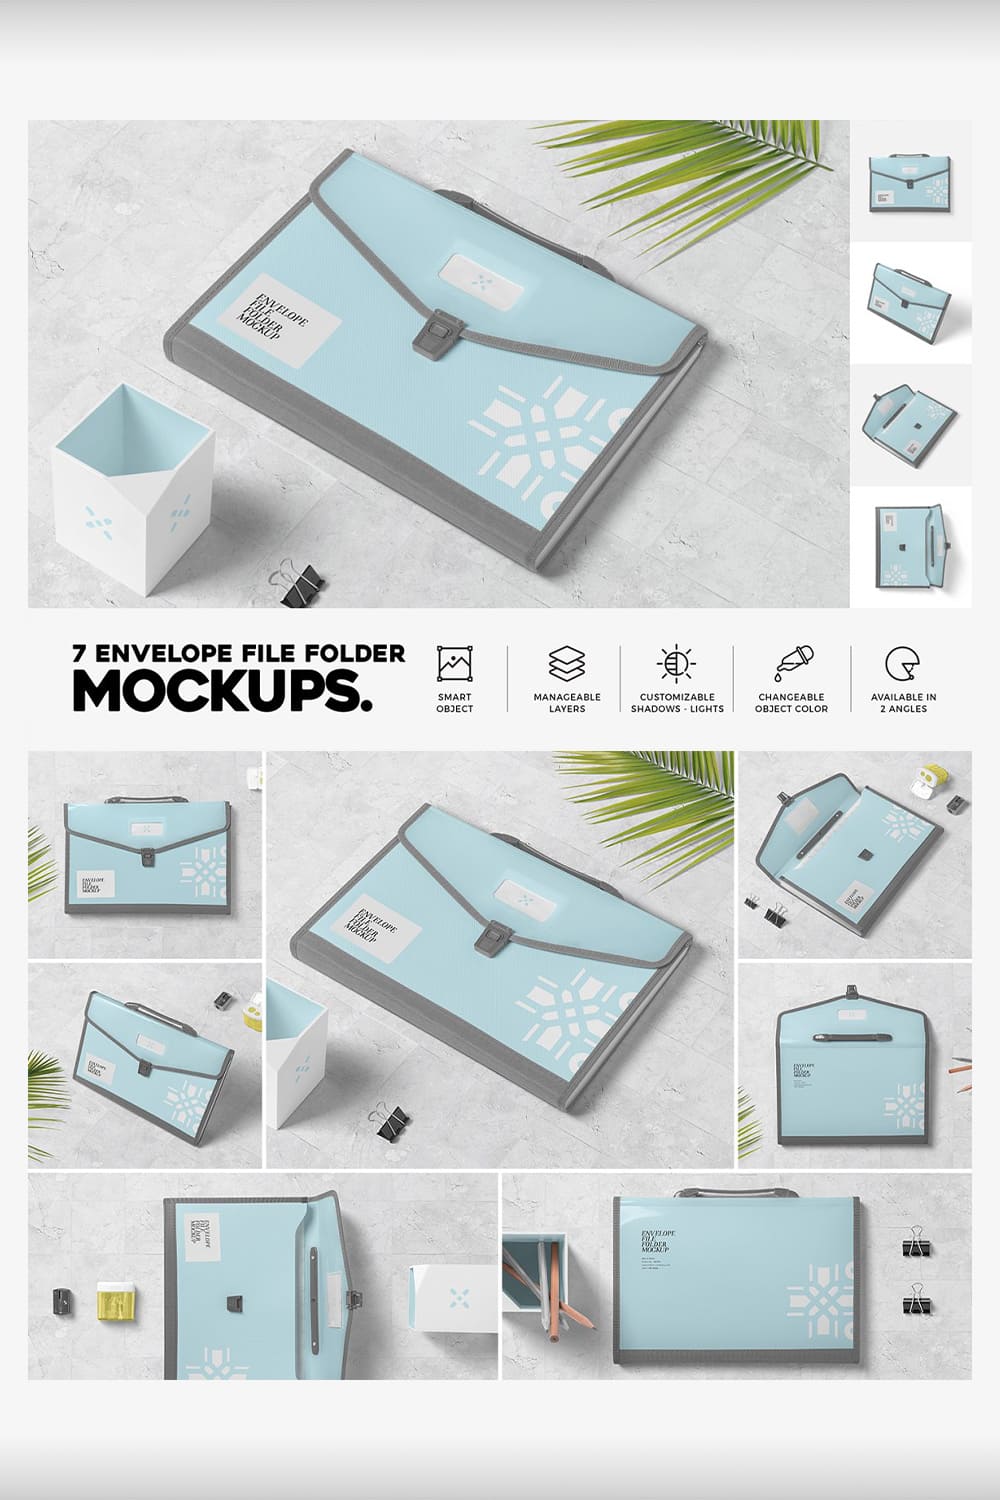 Pack of images envelope file folders with irresistible design.